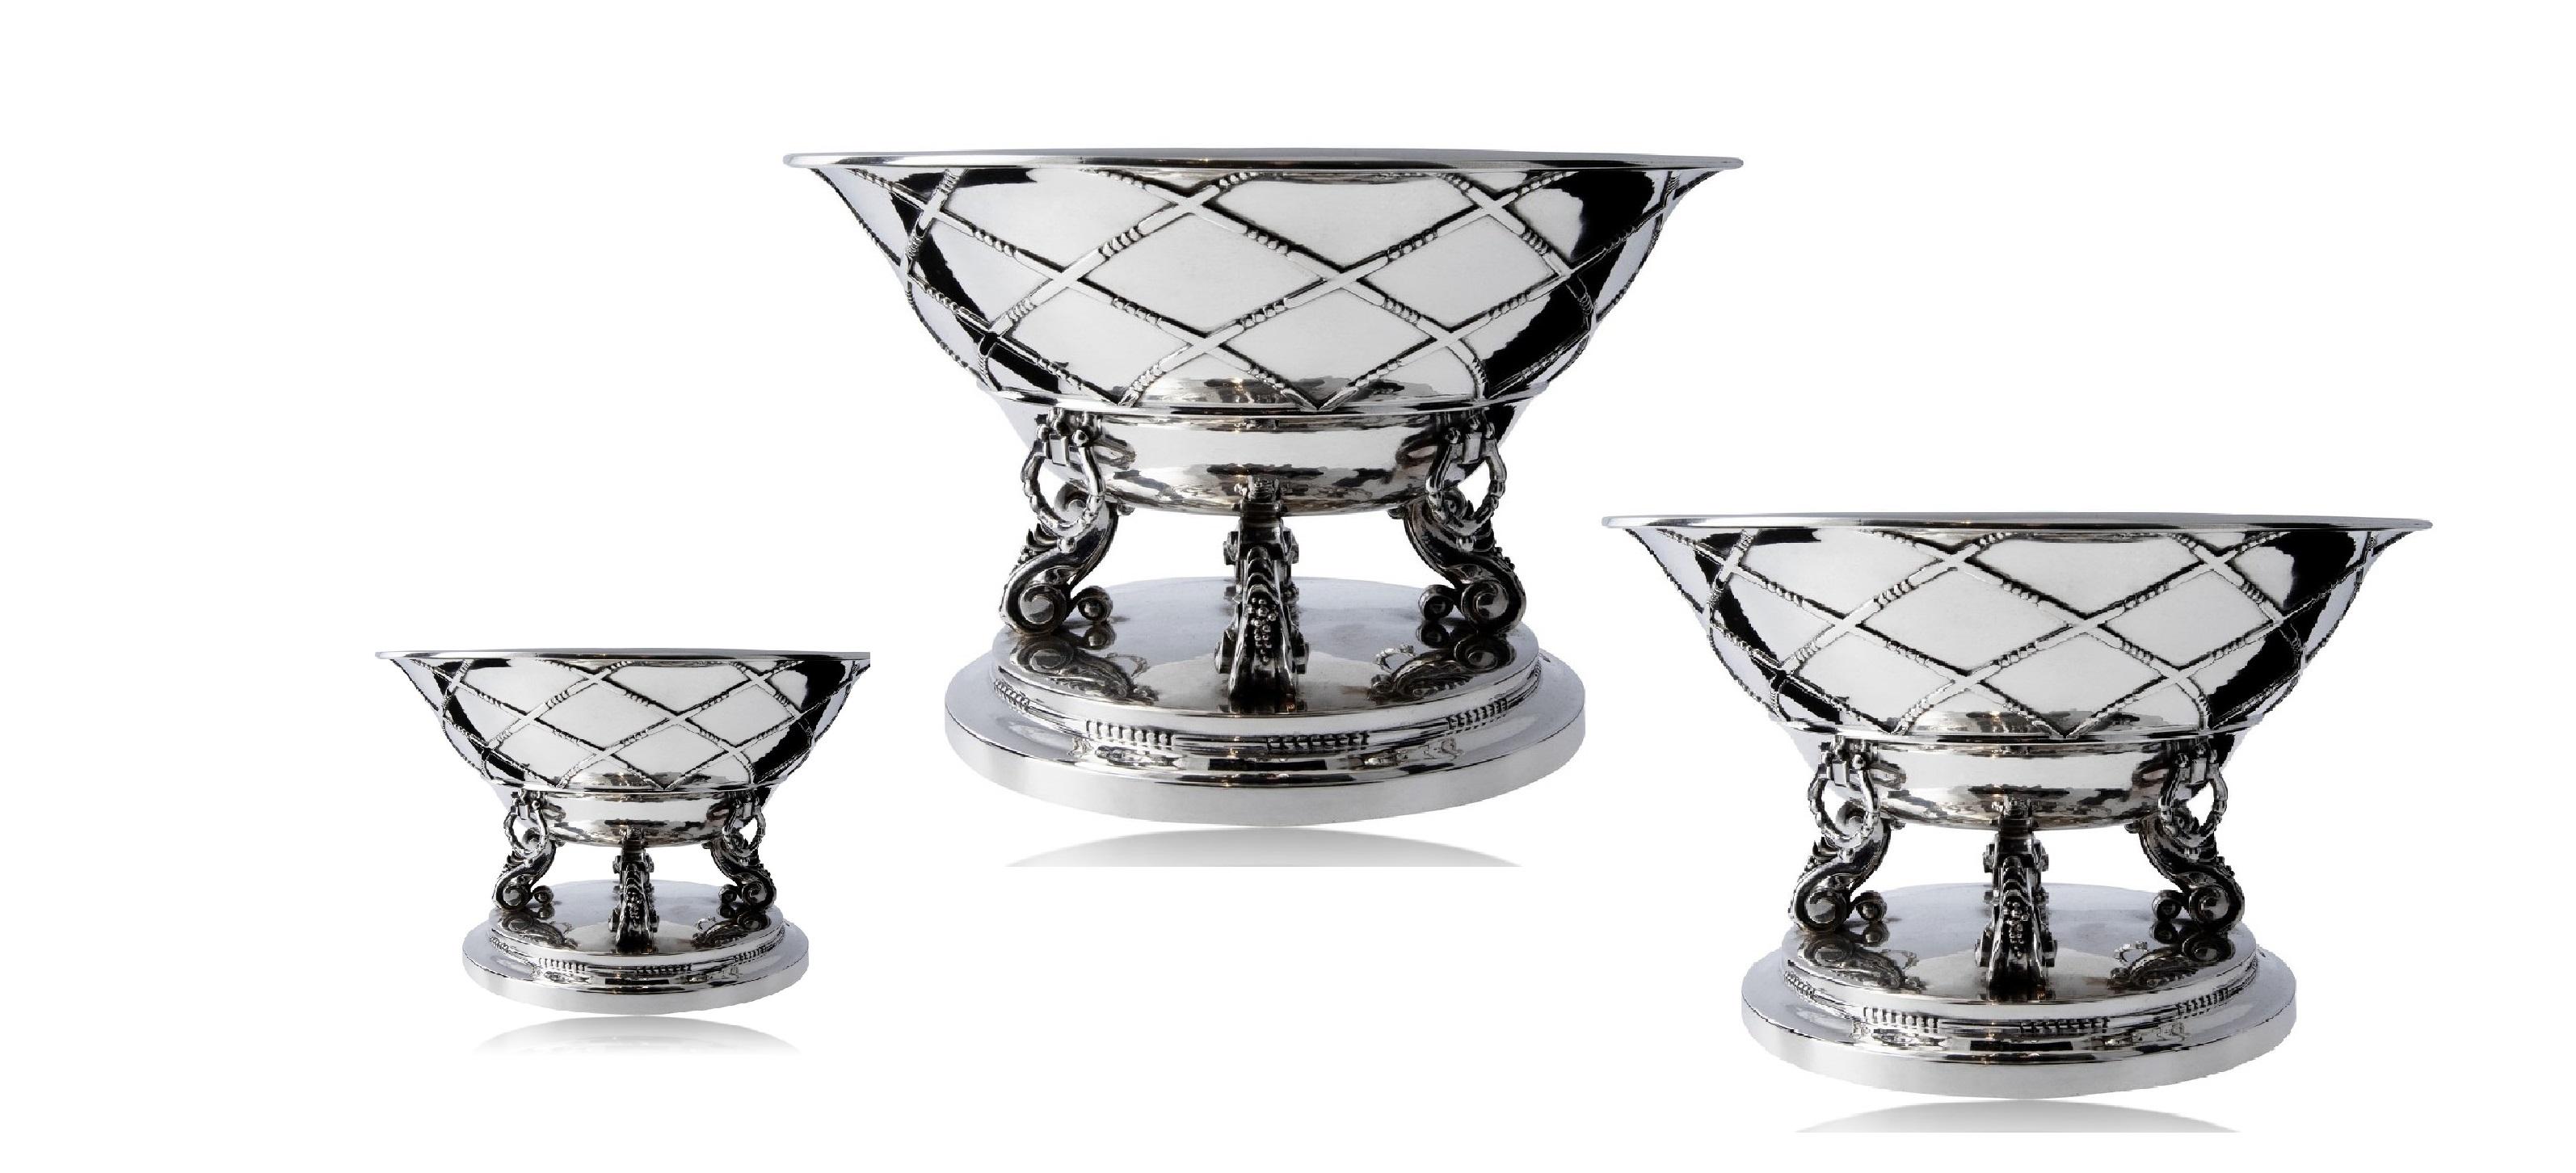 A rare collection of three exquisite Georg Jensen sterling silver bowls design #268a, by Johan Rohde. A stunning and very rare design with its innovative art nouveau design, these Jardinière's demonstrate early indications of the emerging art deco